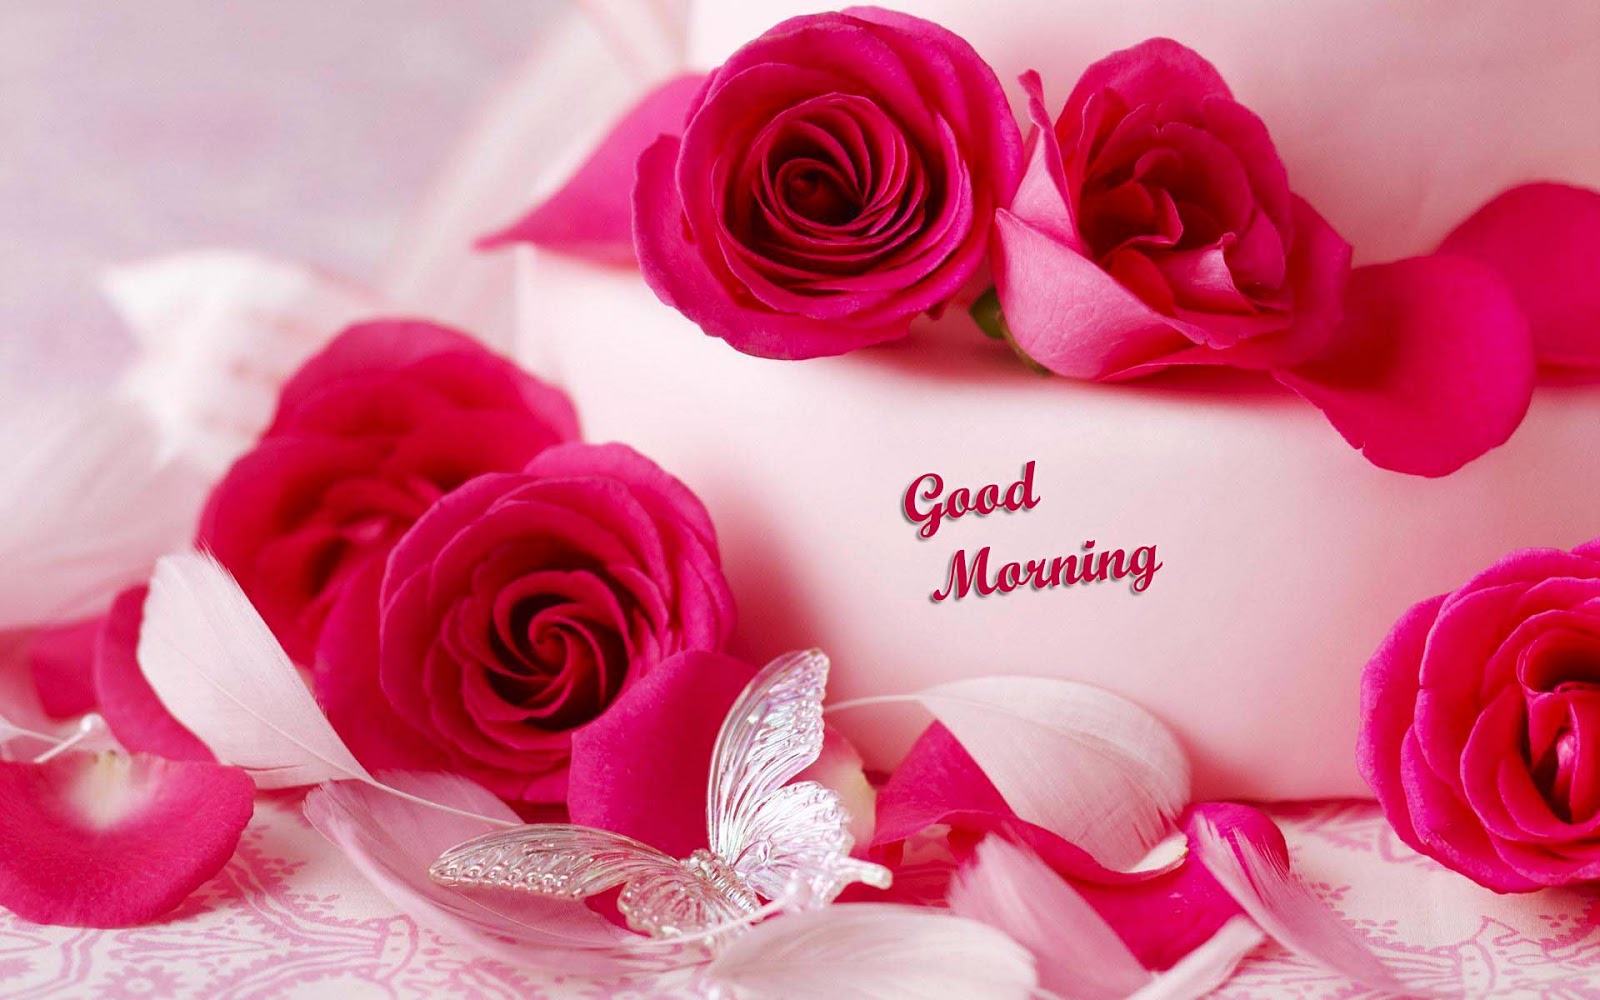 Good Morning Love images - Gud Morning images